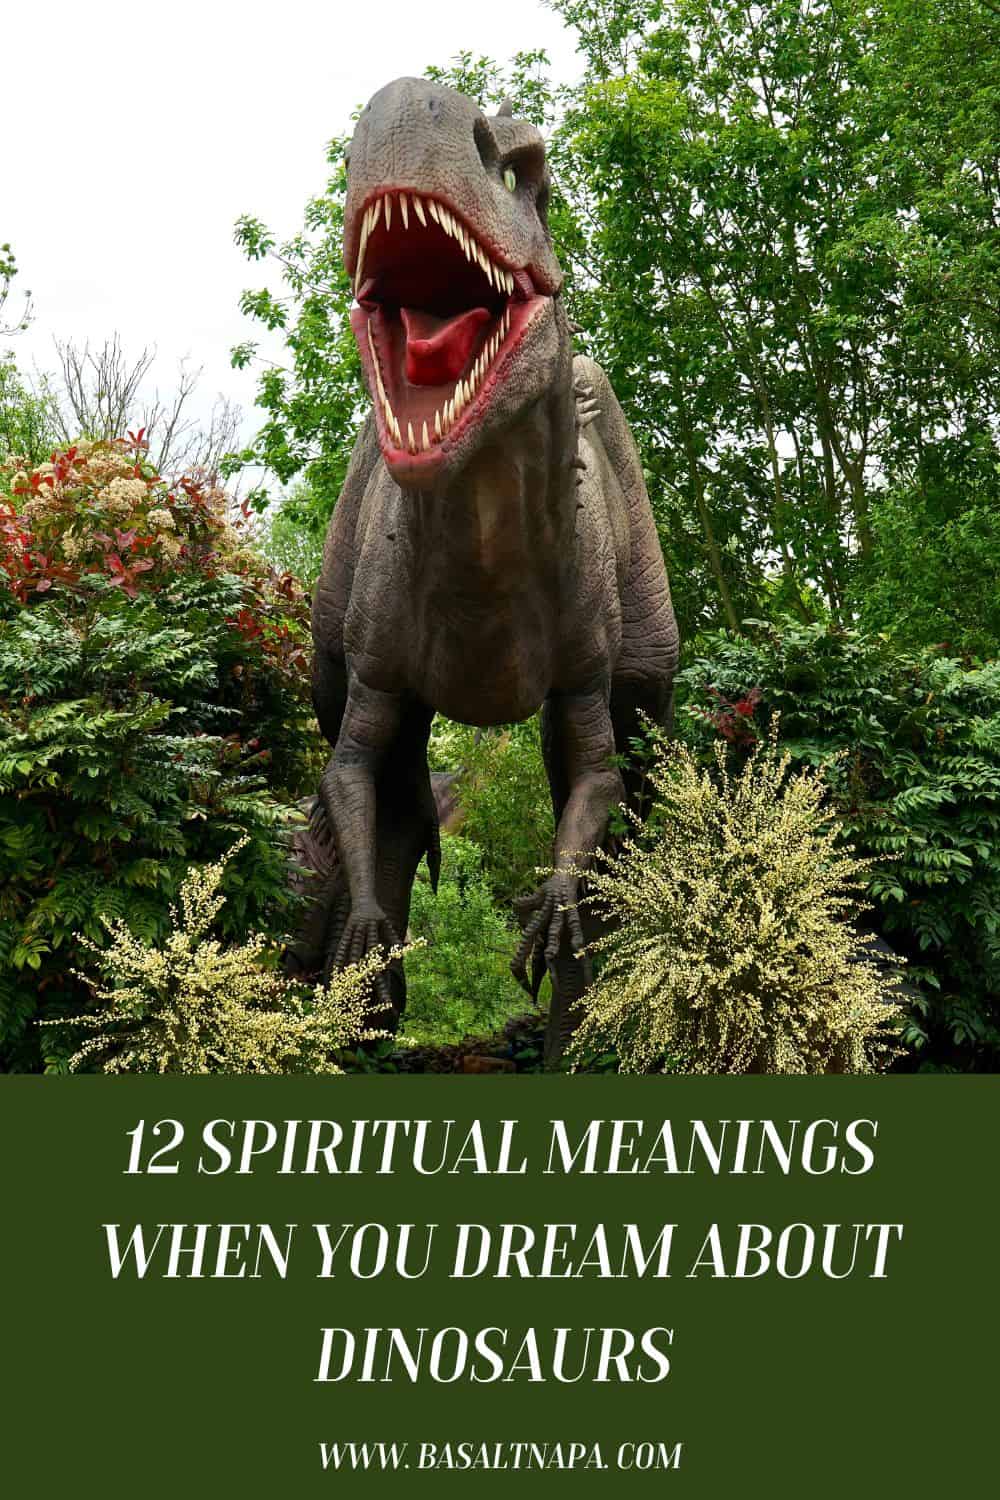 12 Spiritual Meanings When You Dream About Dinosaurs 